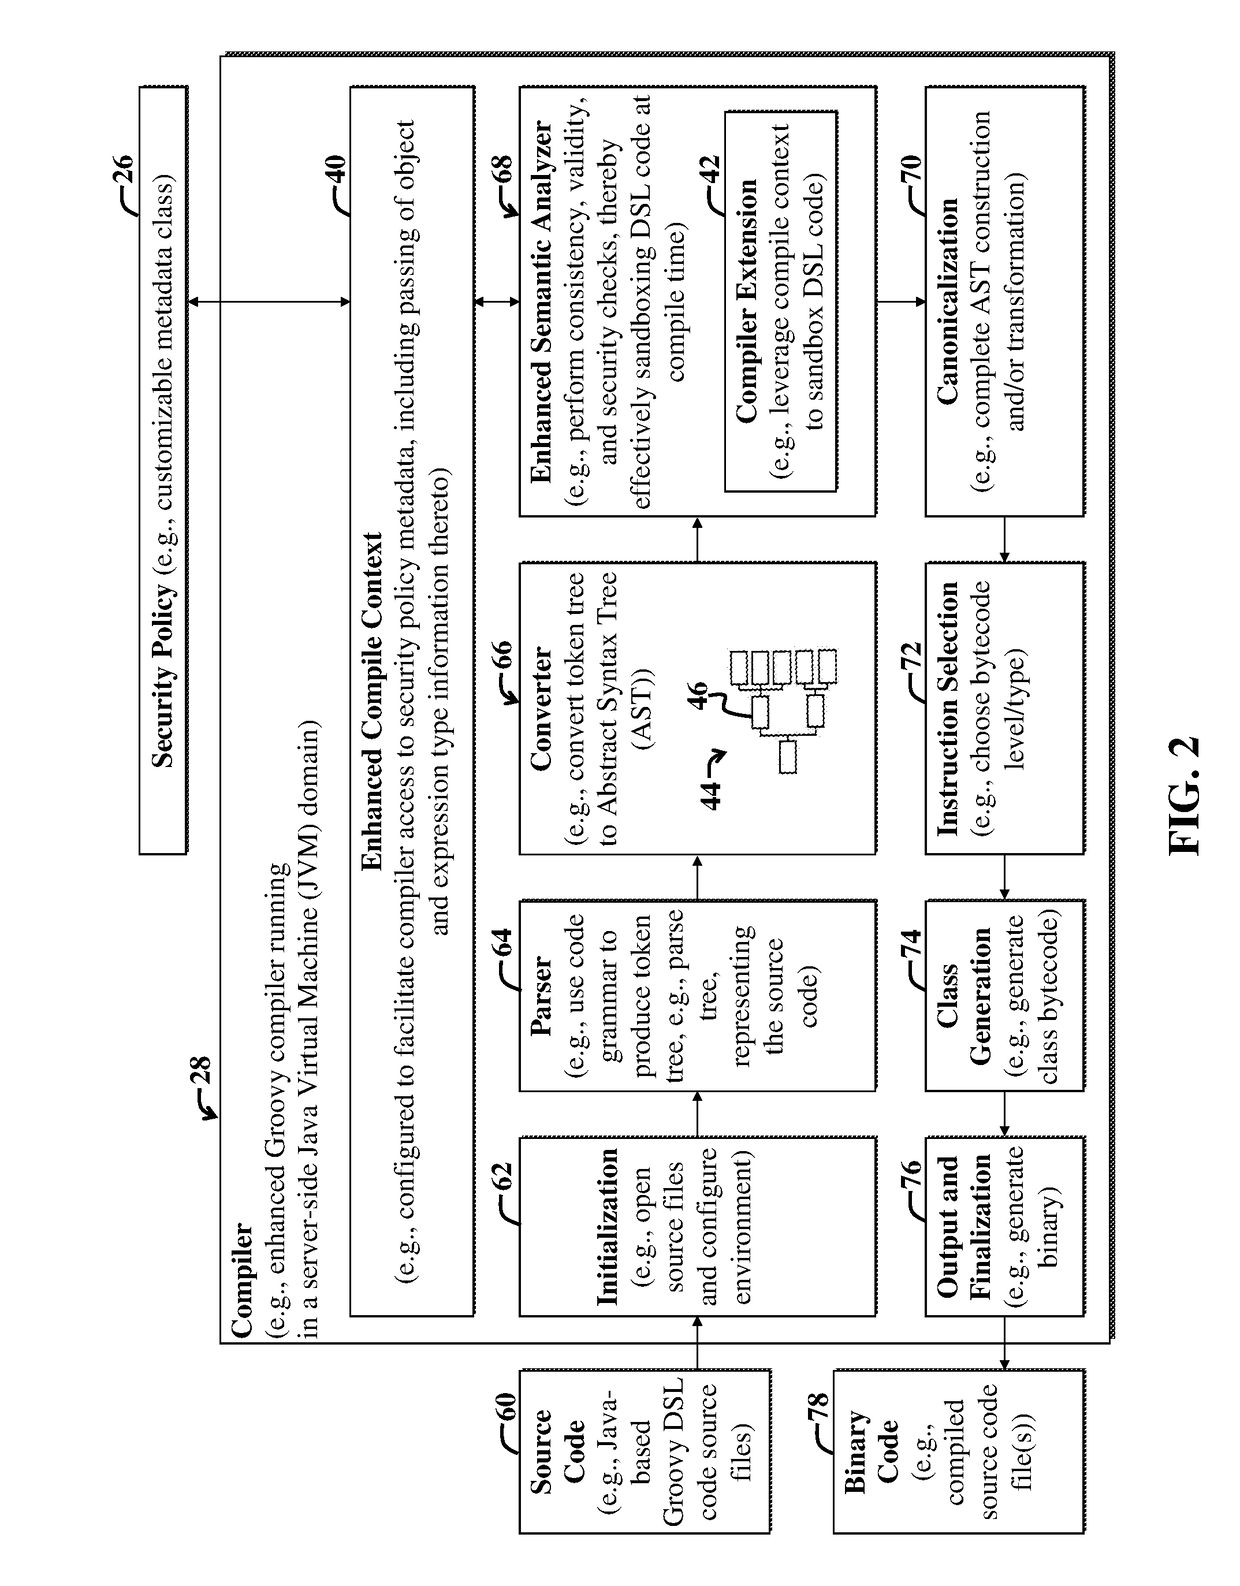 Method for static security enforcement of a DSL